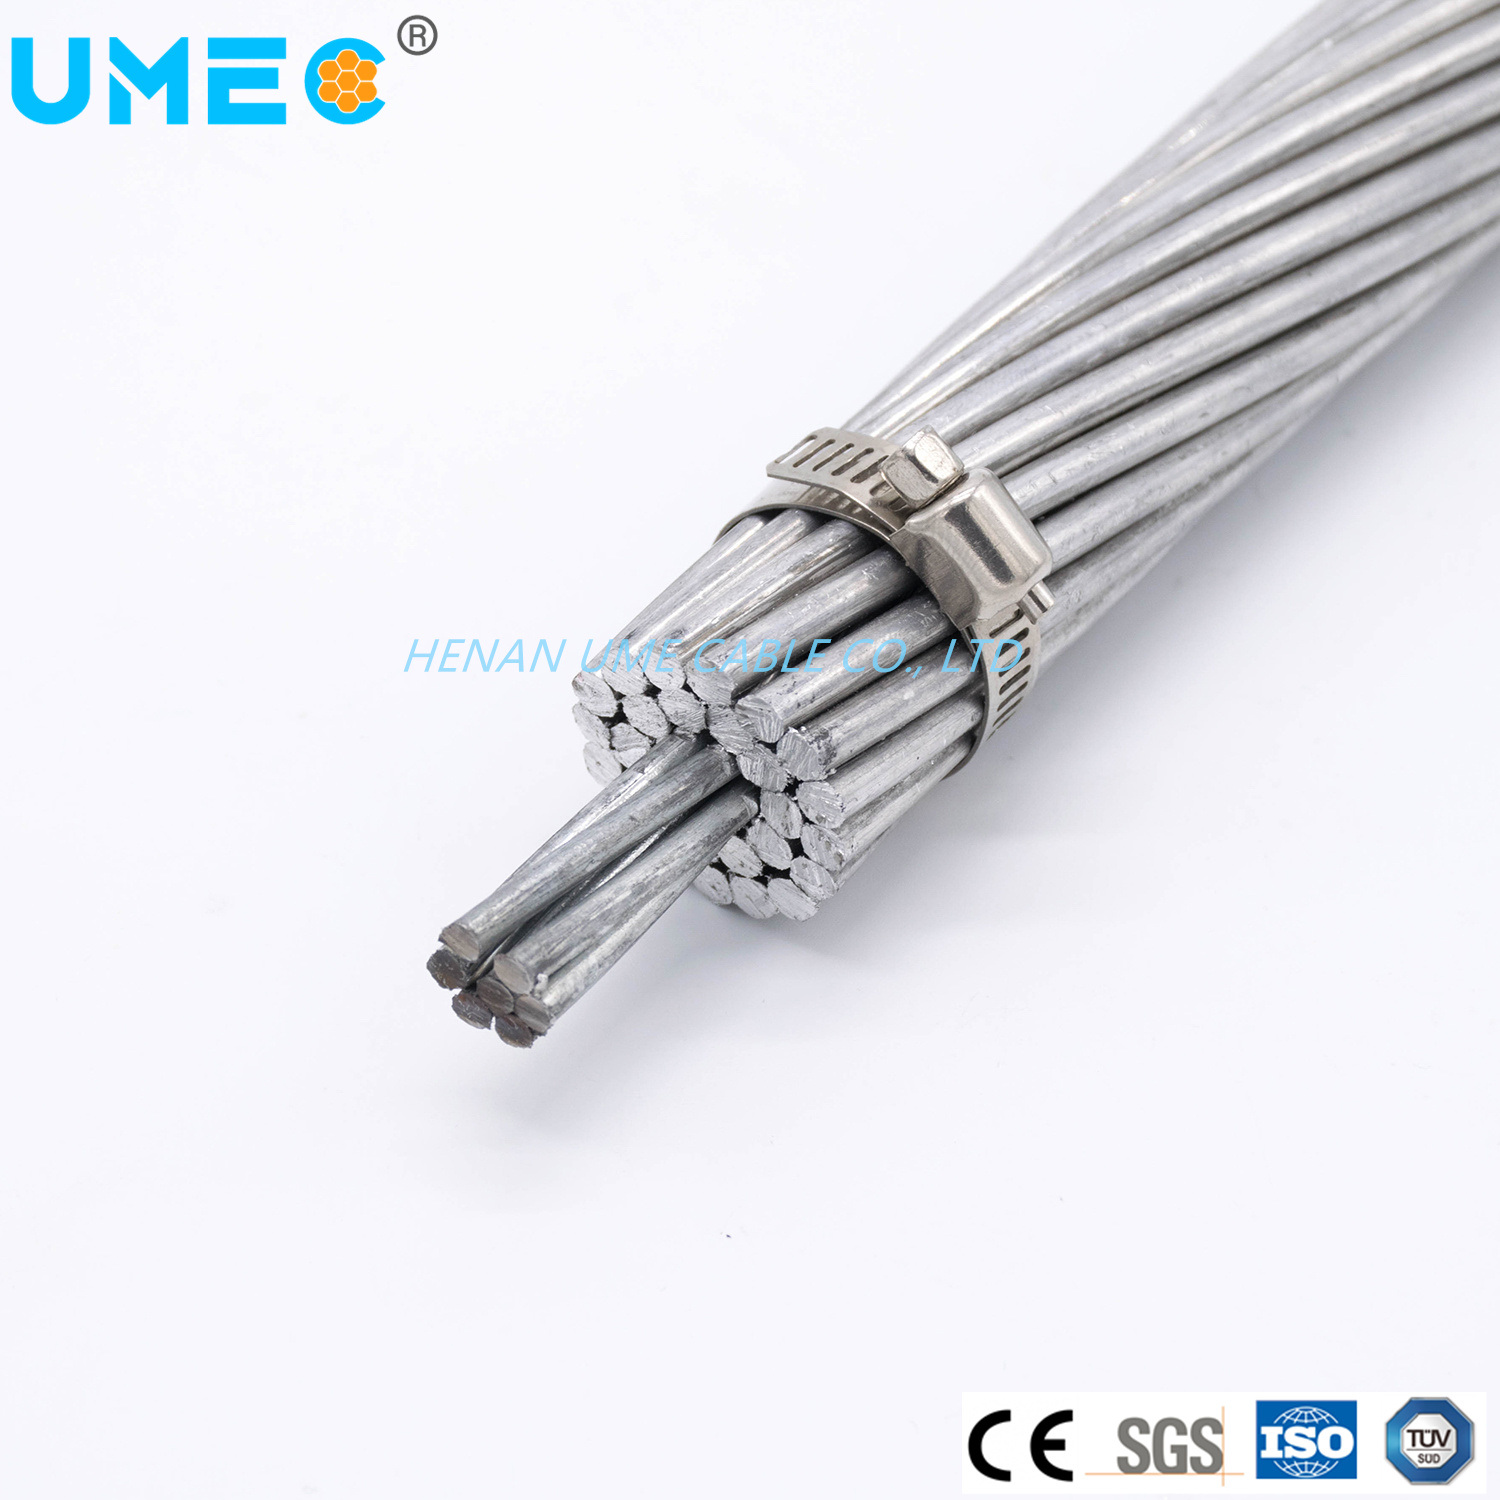 1350h-19 Aluminum Wires Aluminum Clad Steel Wires Bare Conductor ACSR/Aw